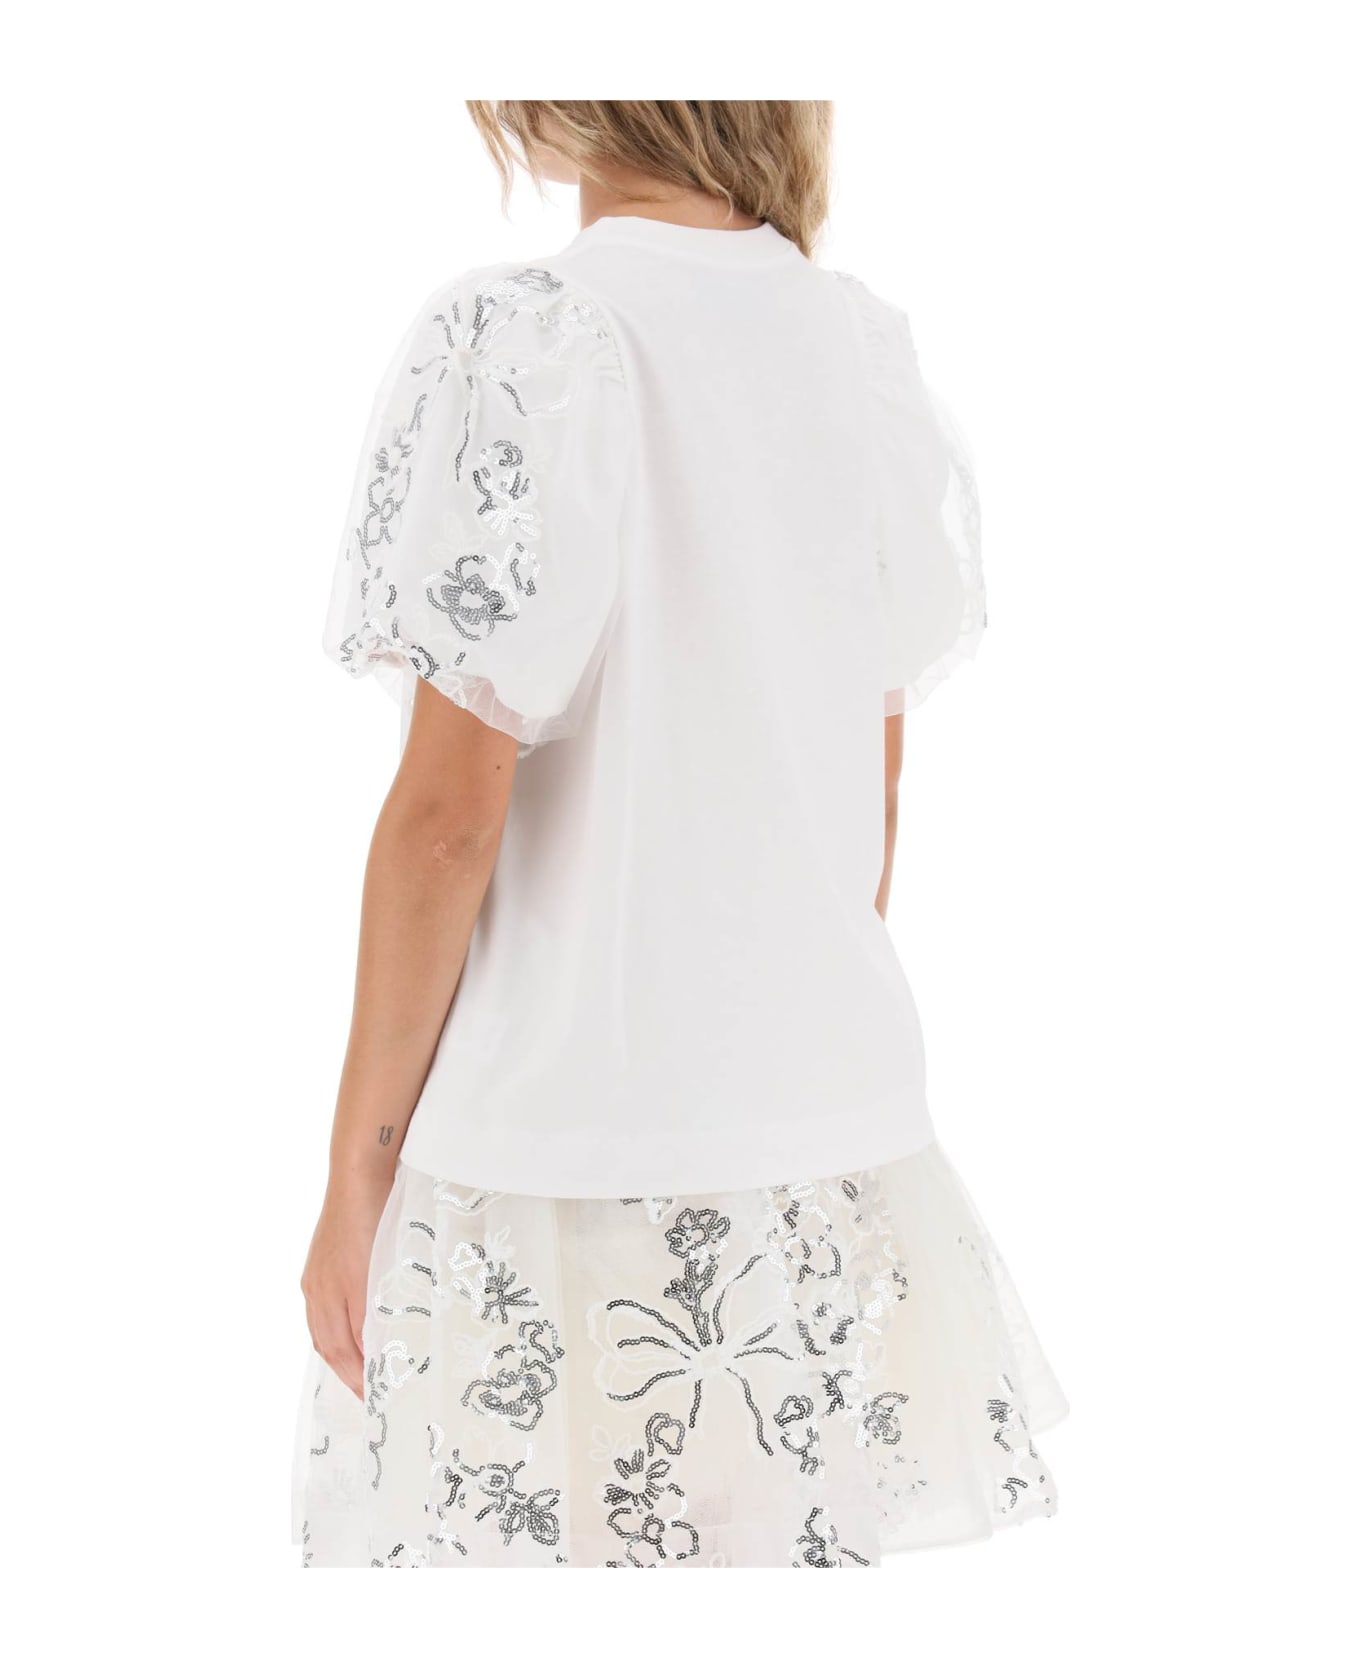 Simone Rocha Embroidered Puff Sleeve A-line T-shirt - WHITE (White) ポロシャツ